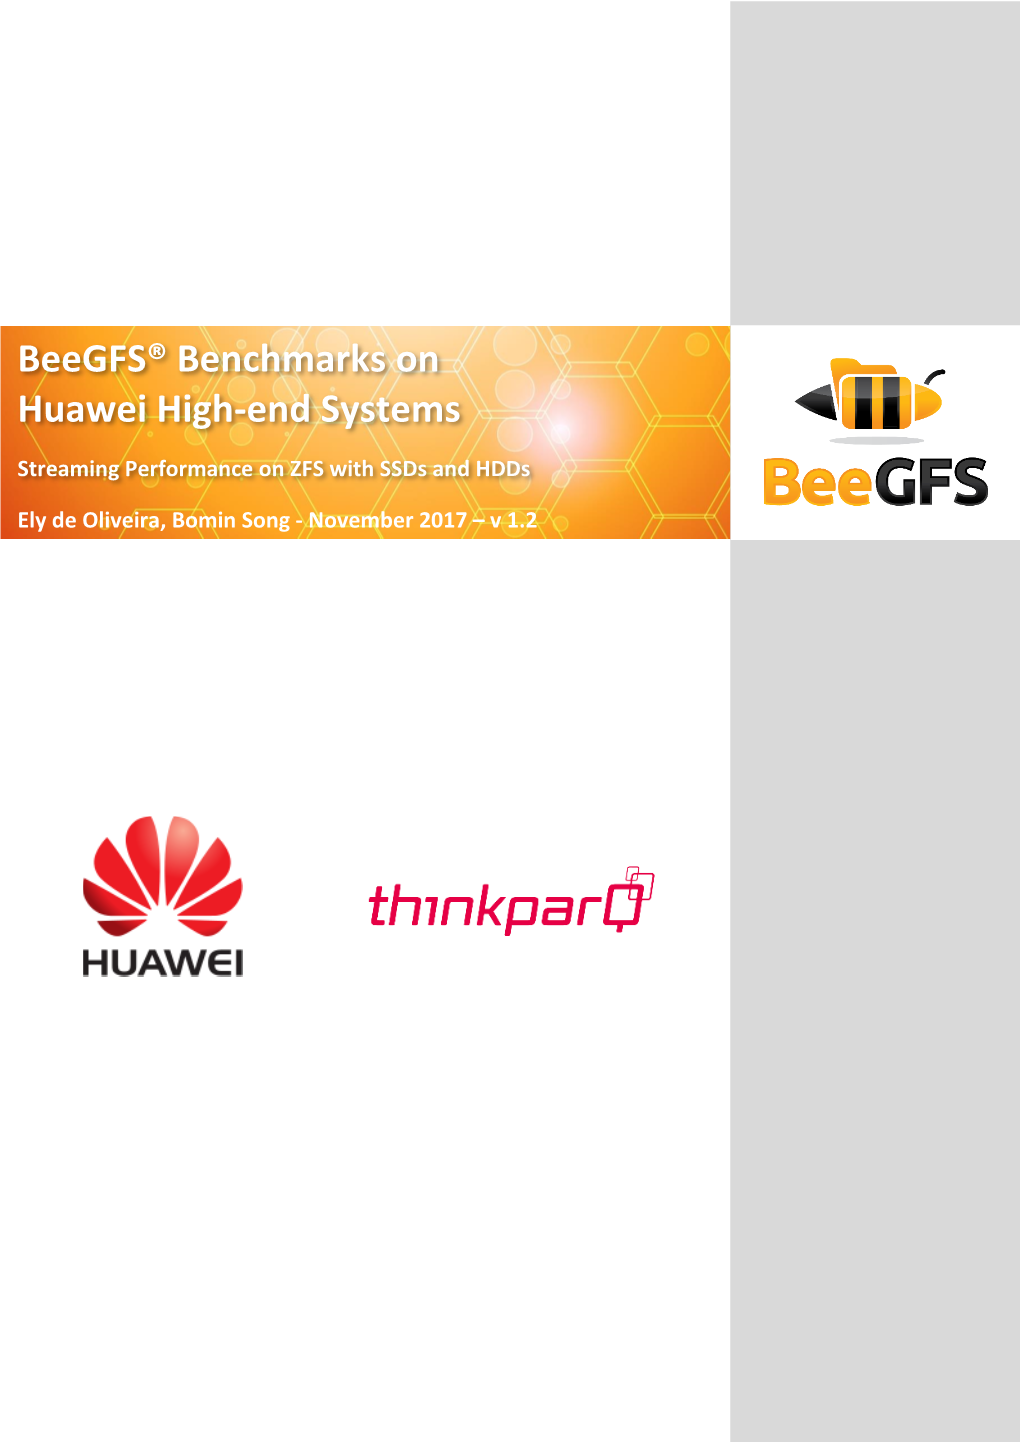 Beegfs® Benchmarks on Huawei High-End Systems